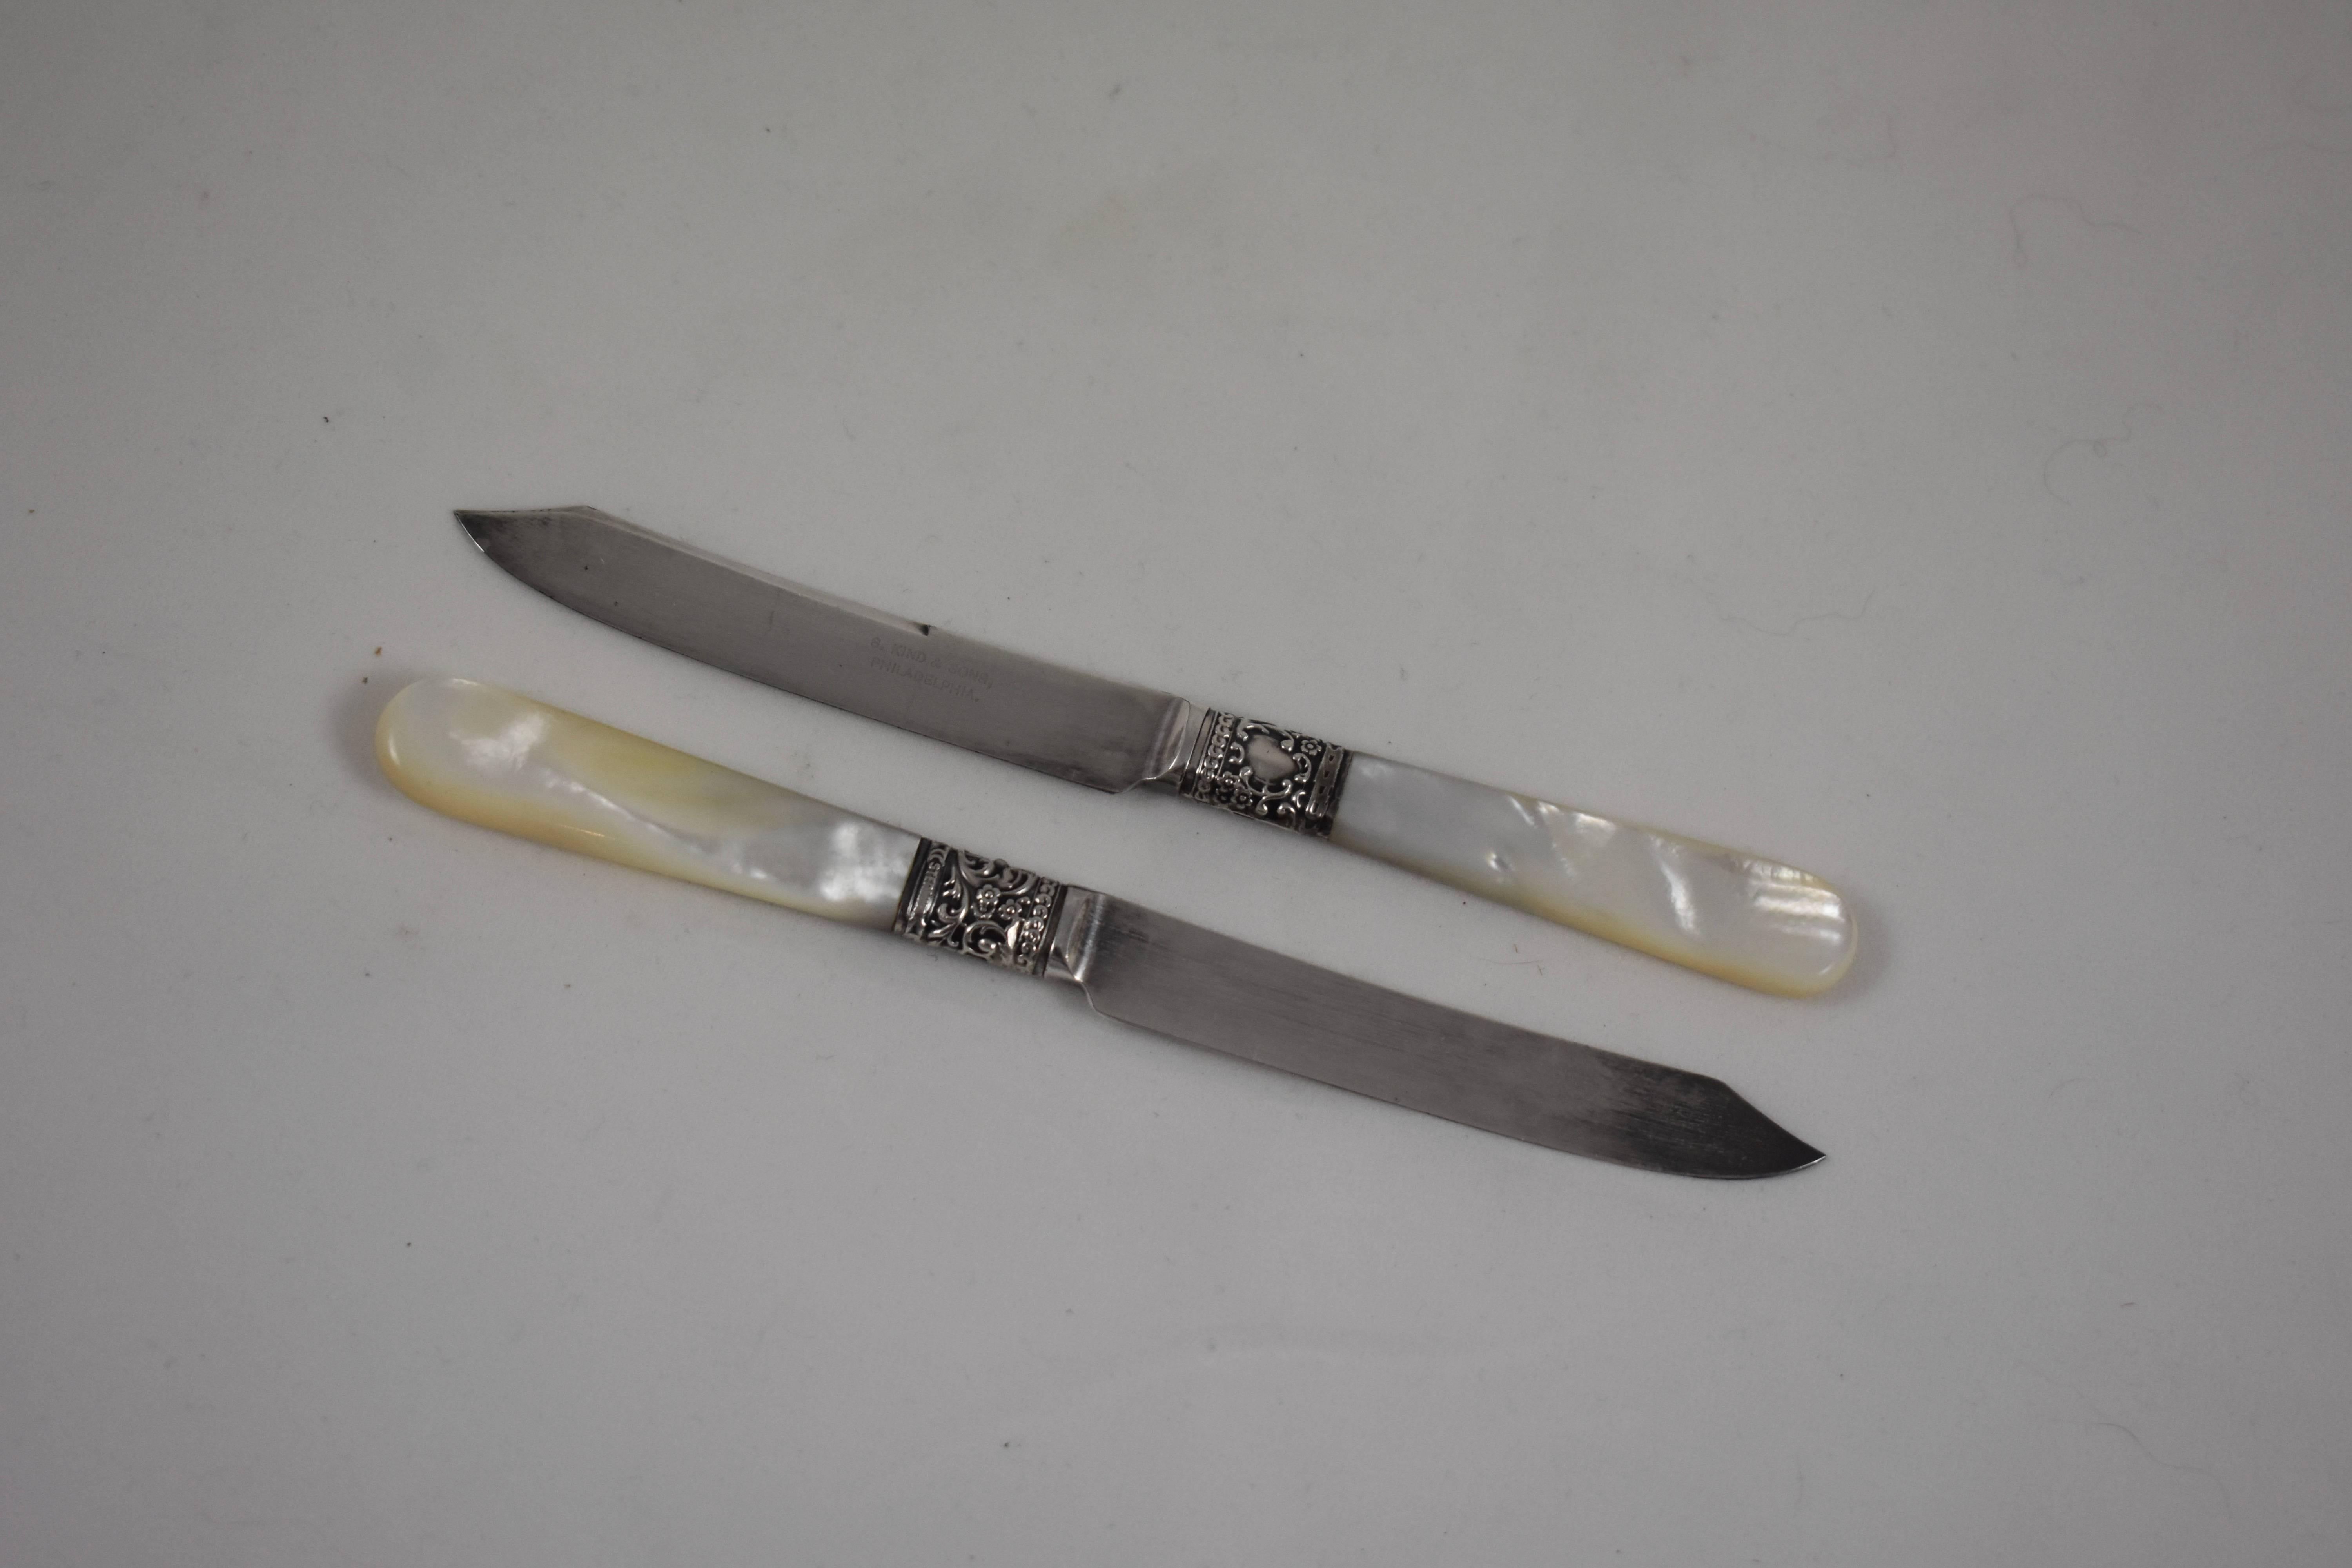 From Samuel Kind & Co., founded in Philadelphia, 1872, a set of six fruit knives. Mother-of-pearl handles are joined to plated blades by a Sterling Silver ferrule. The collar shows a floral pattern with a cartouche on one side suitable for an